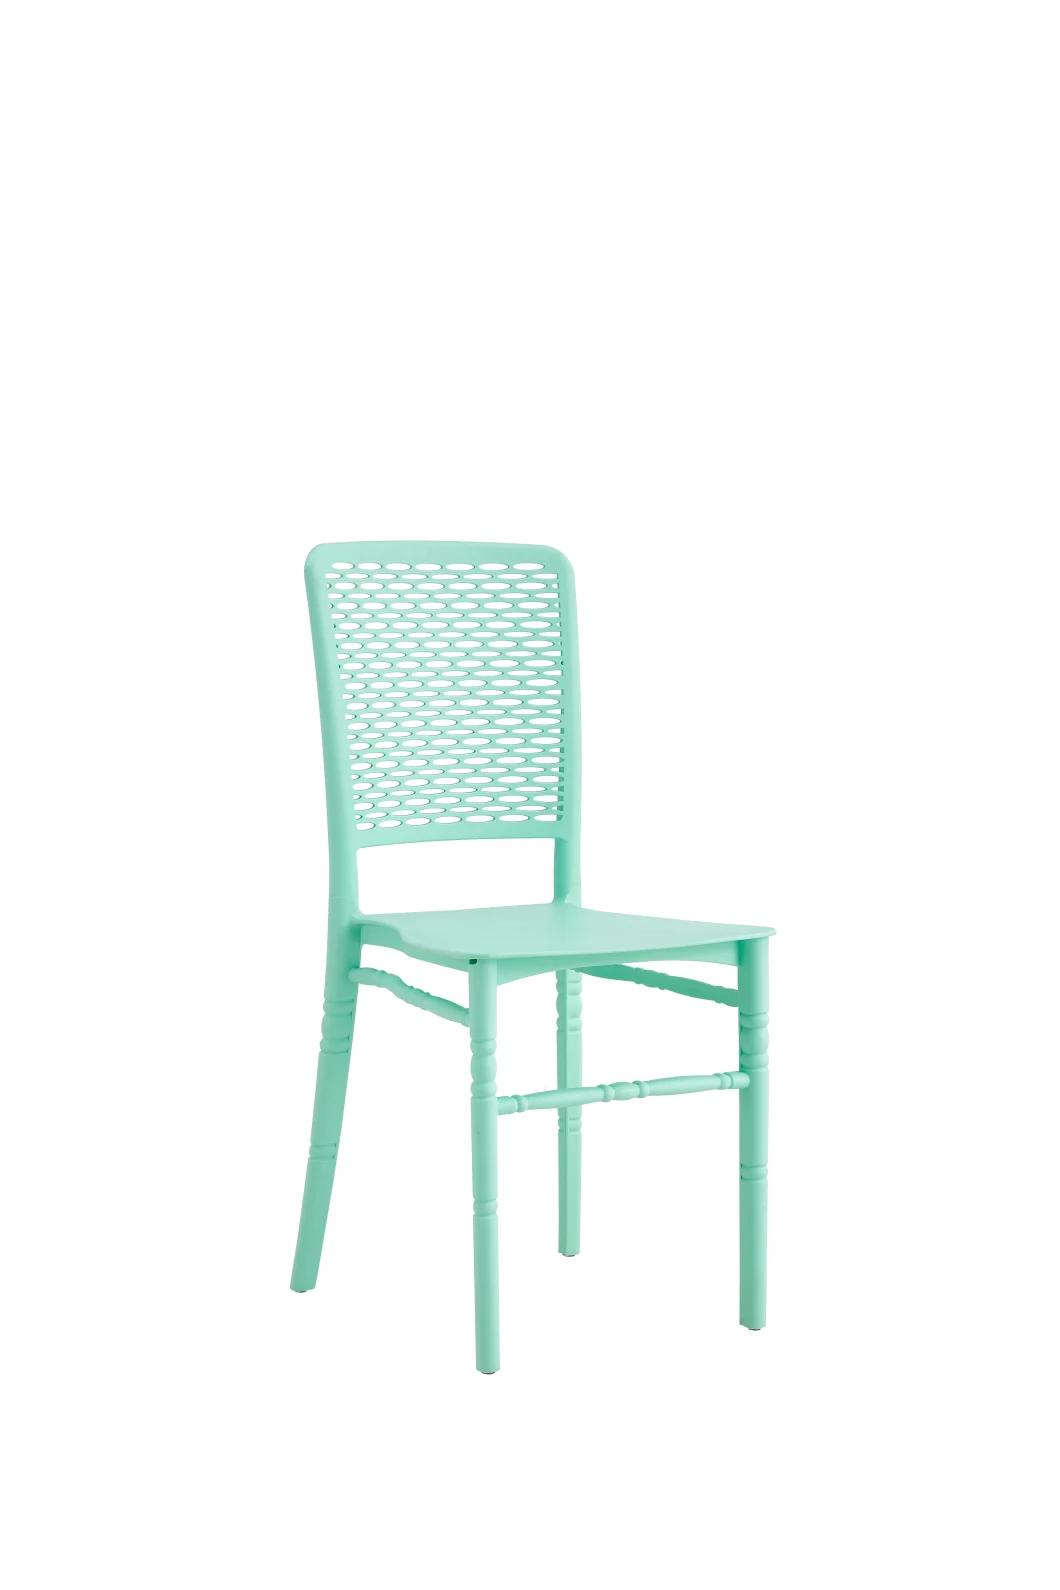 Simple Famous Modern Style Stackable Blue Designer Plastic Chair with Holes